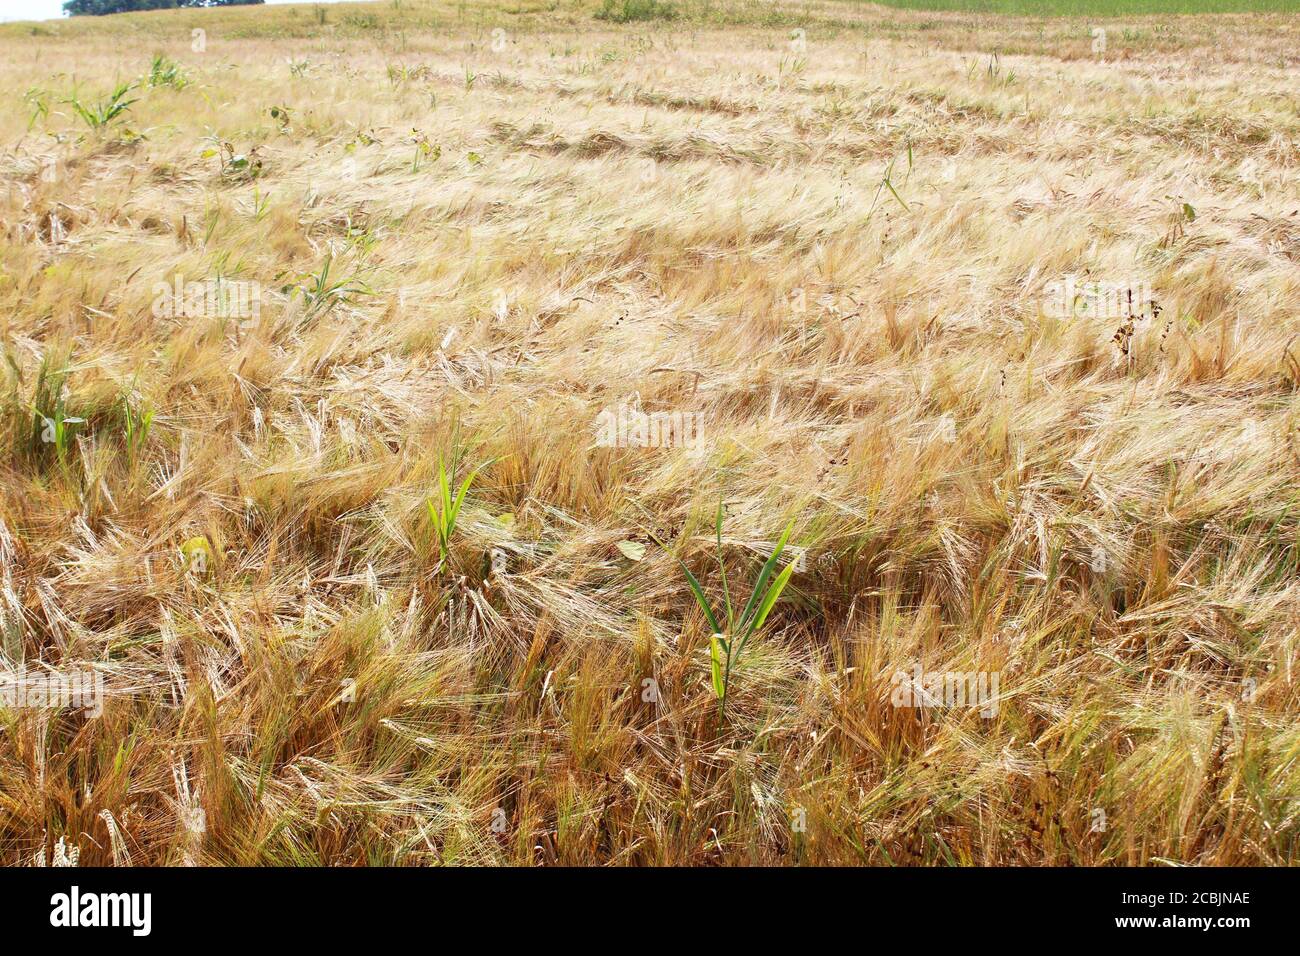 Big golden rye field (Secale cereale) in Pickmere, England Stock Photo